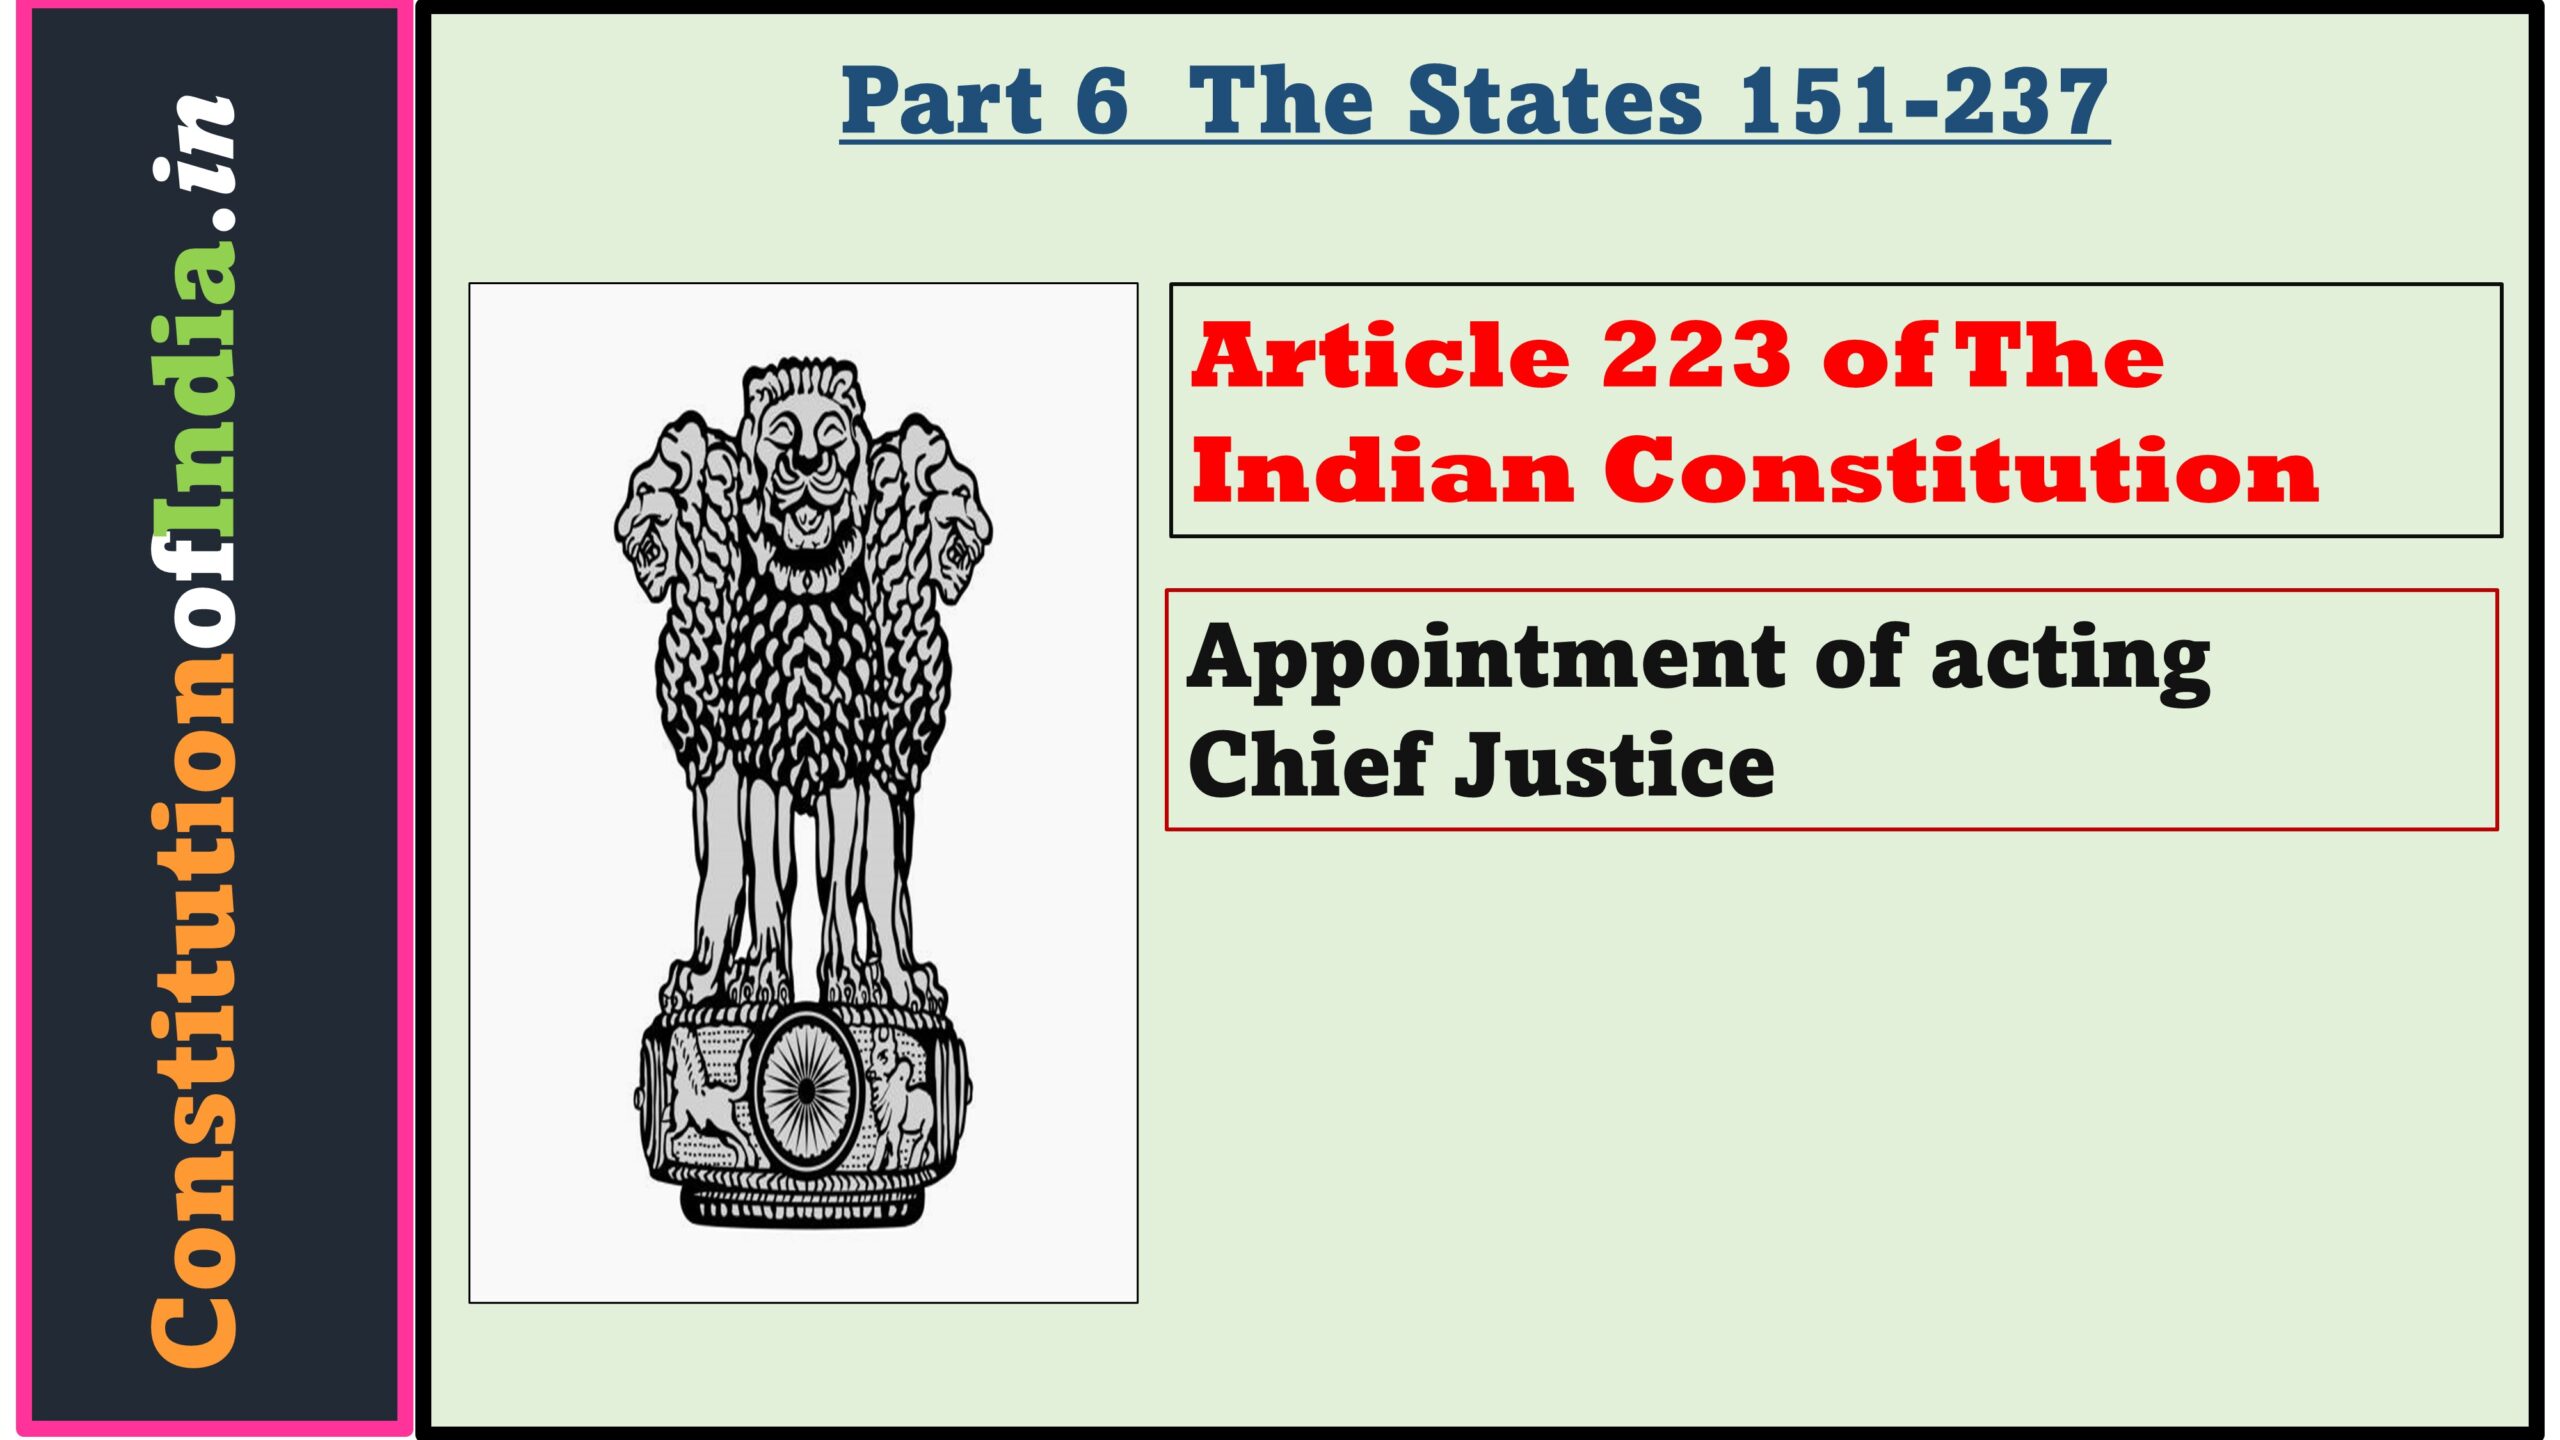 Article 223 of The Indian Constitution